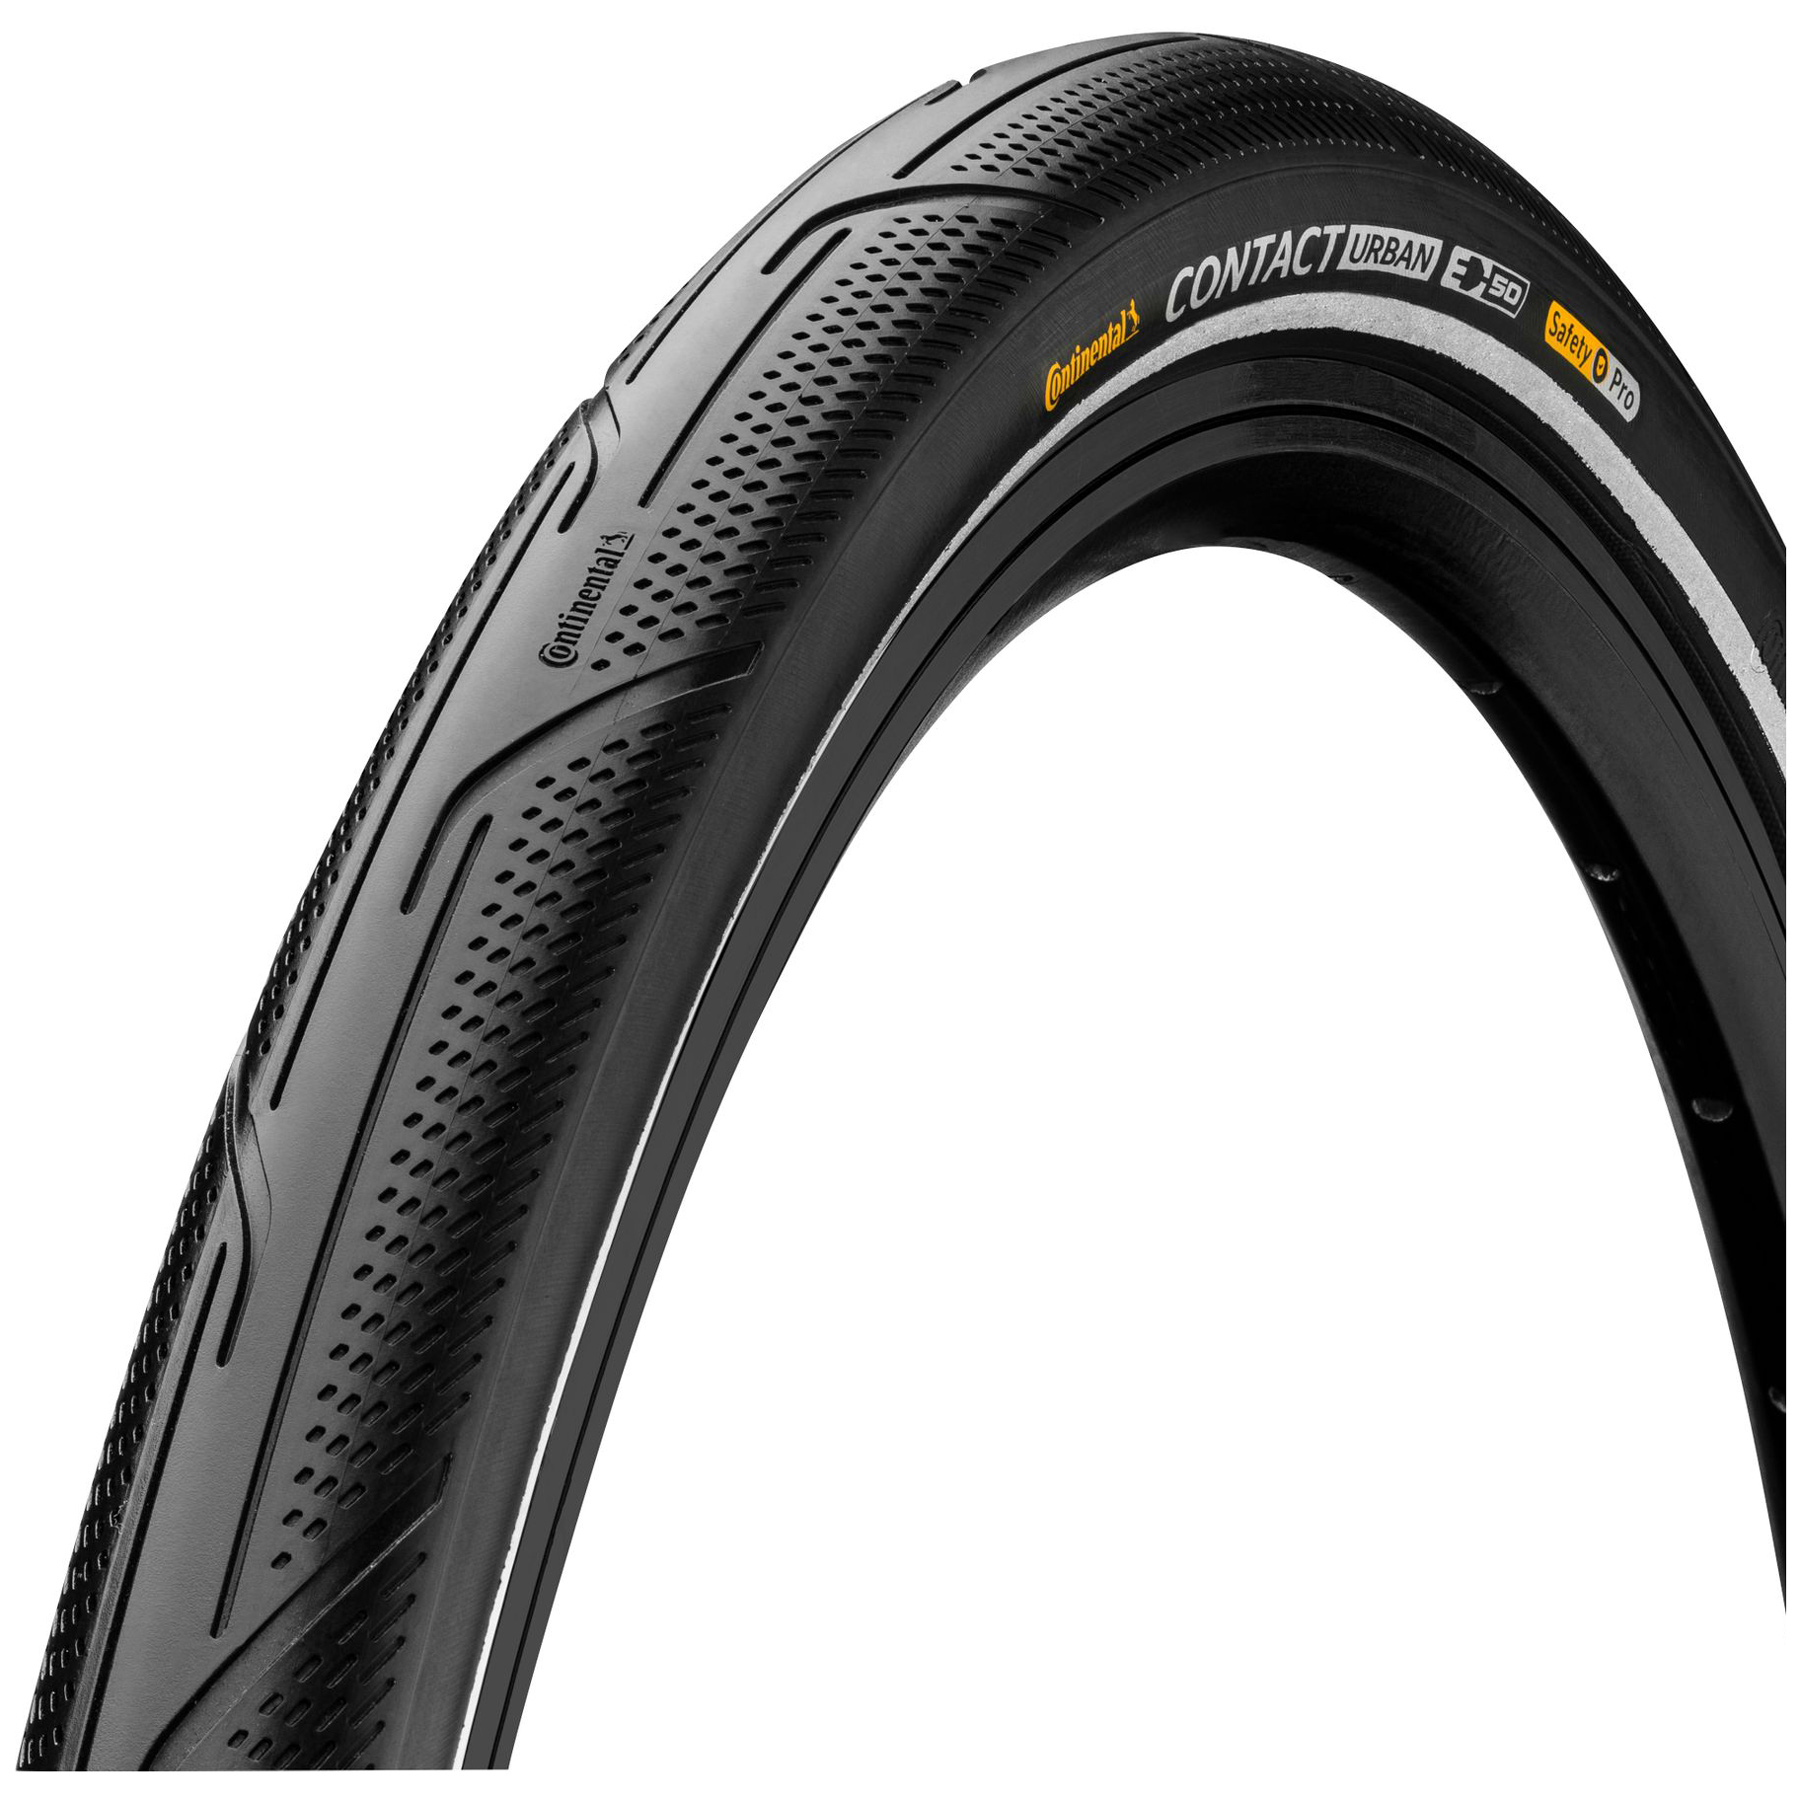 Image of Continental Contact Urban Wire Bead Tire - PureGrip | ECE-R75 - 35-622 | black reflective